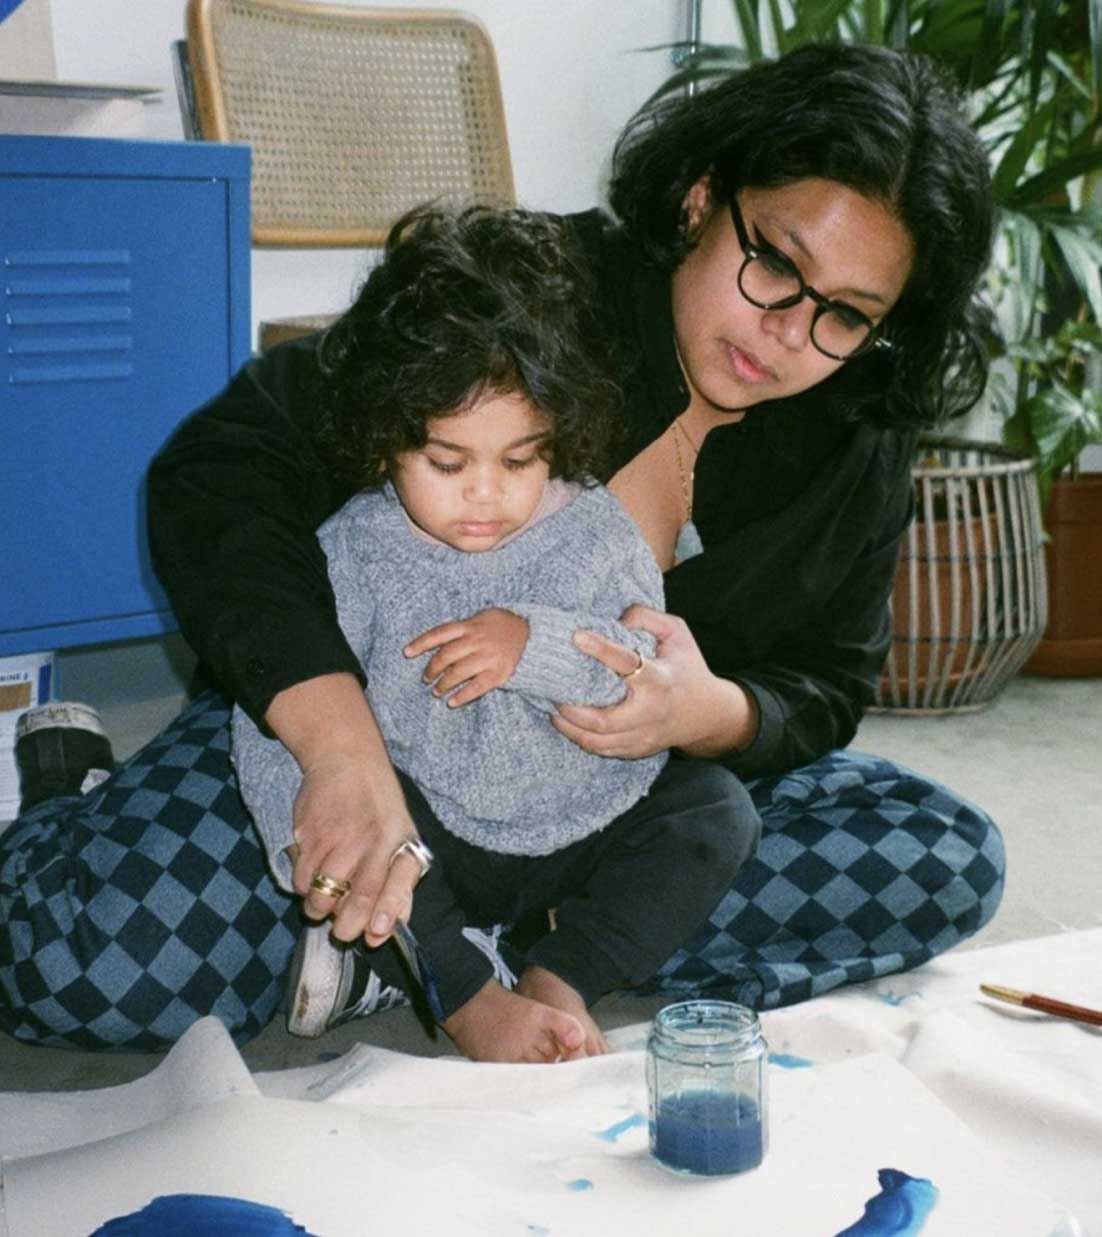 Artist Laxmi Hussain and her child creating artwork on the floor of her studio